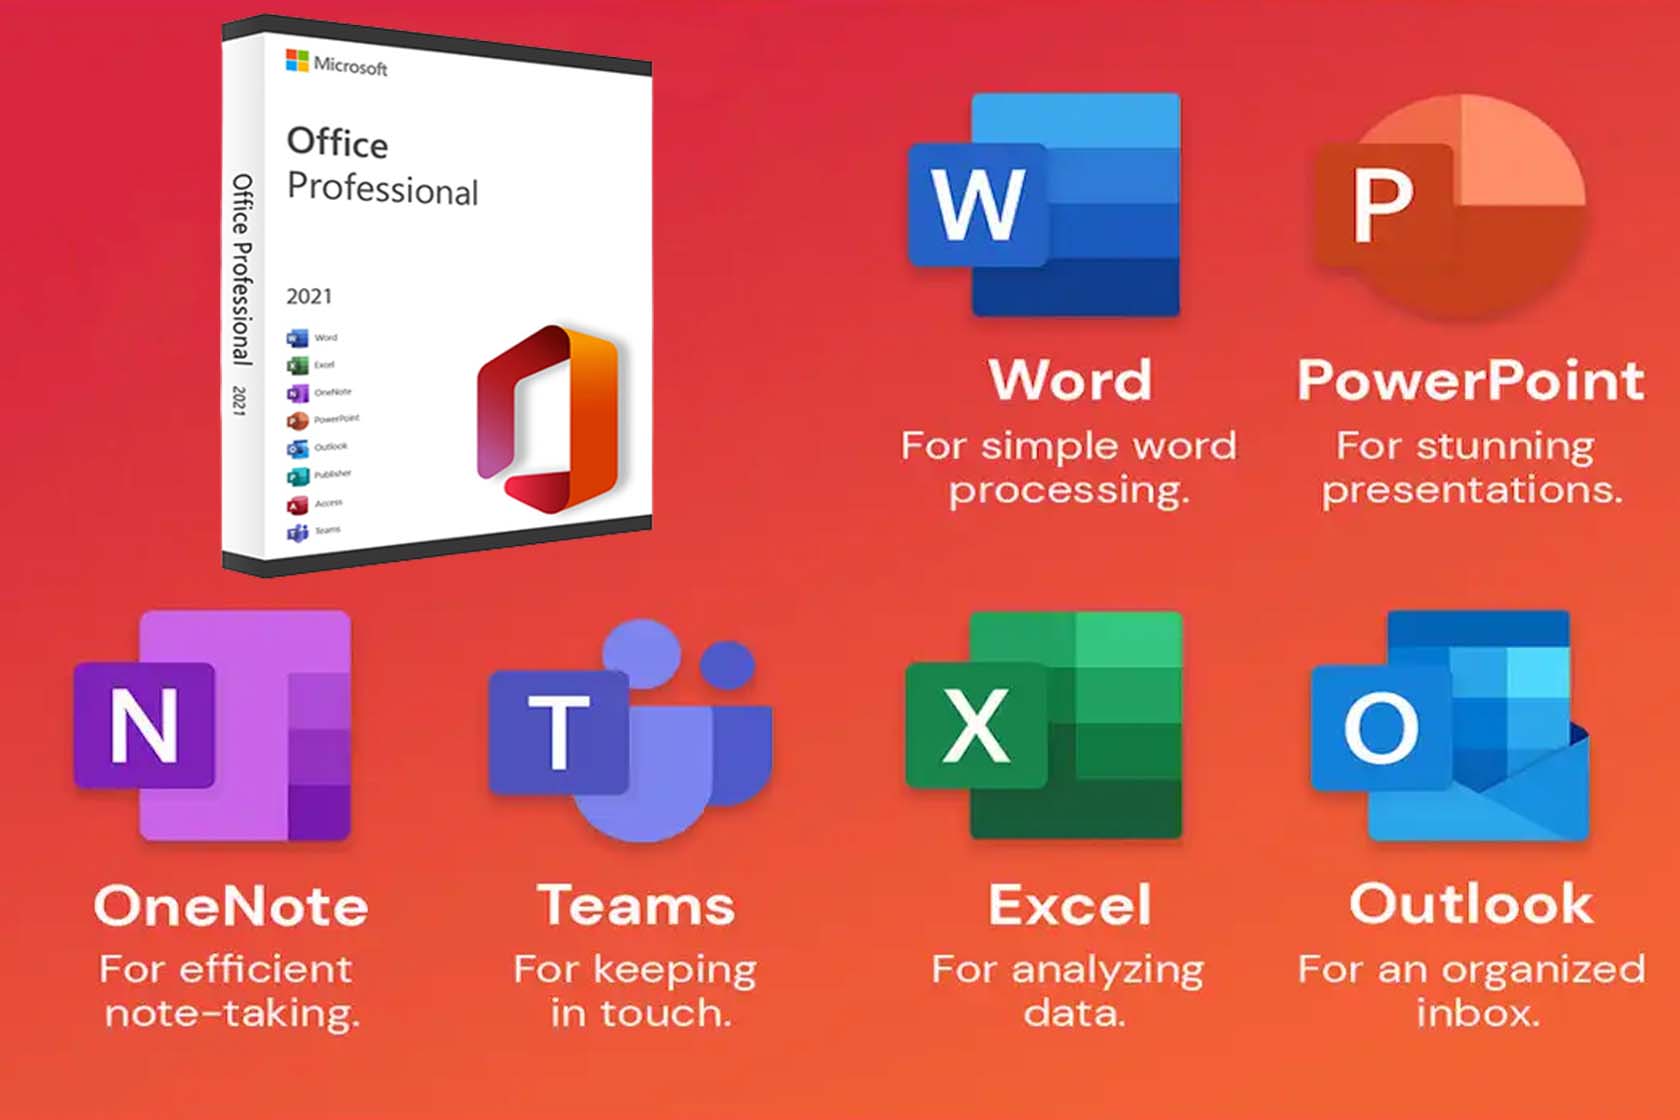 Get a lifetime of Microsoft Office Suite for $30 at StackSocial